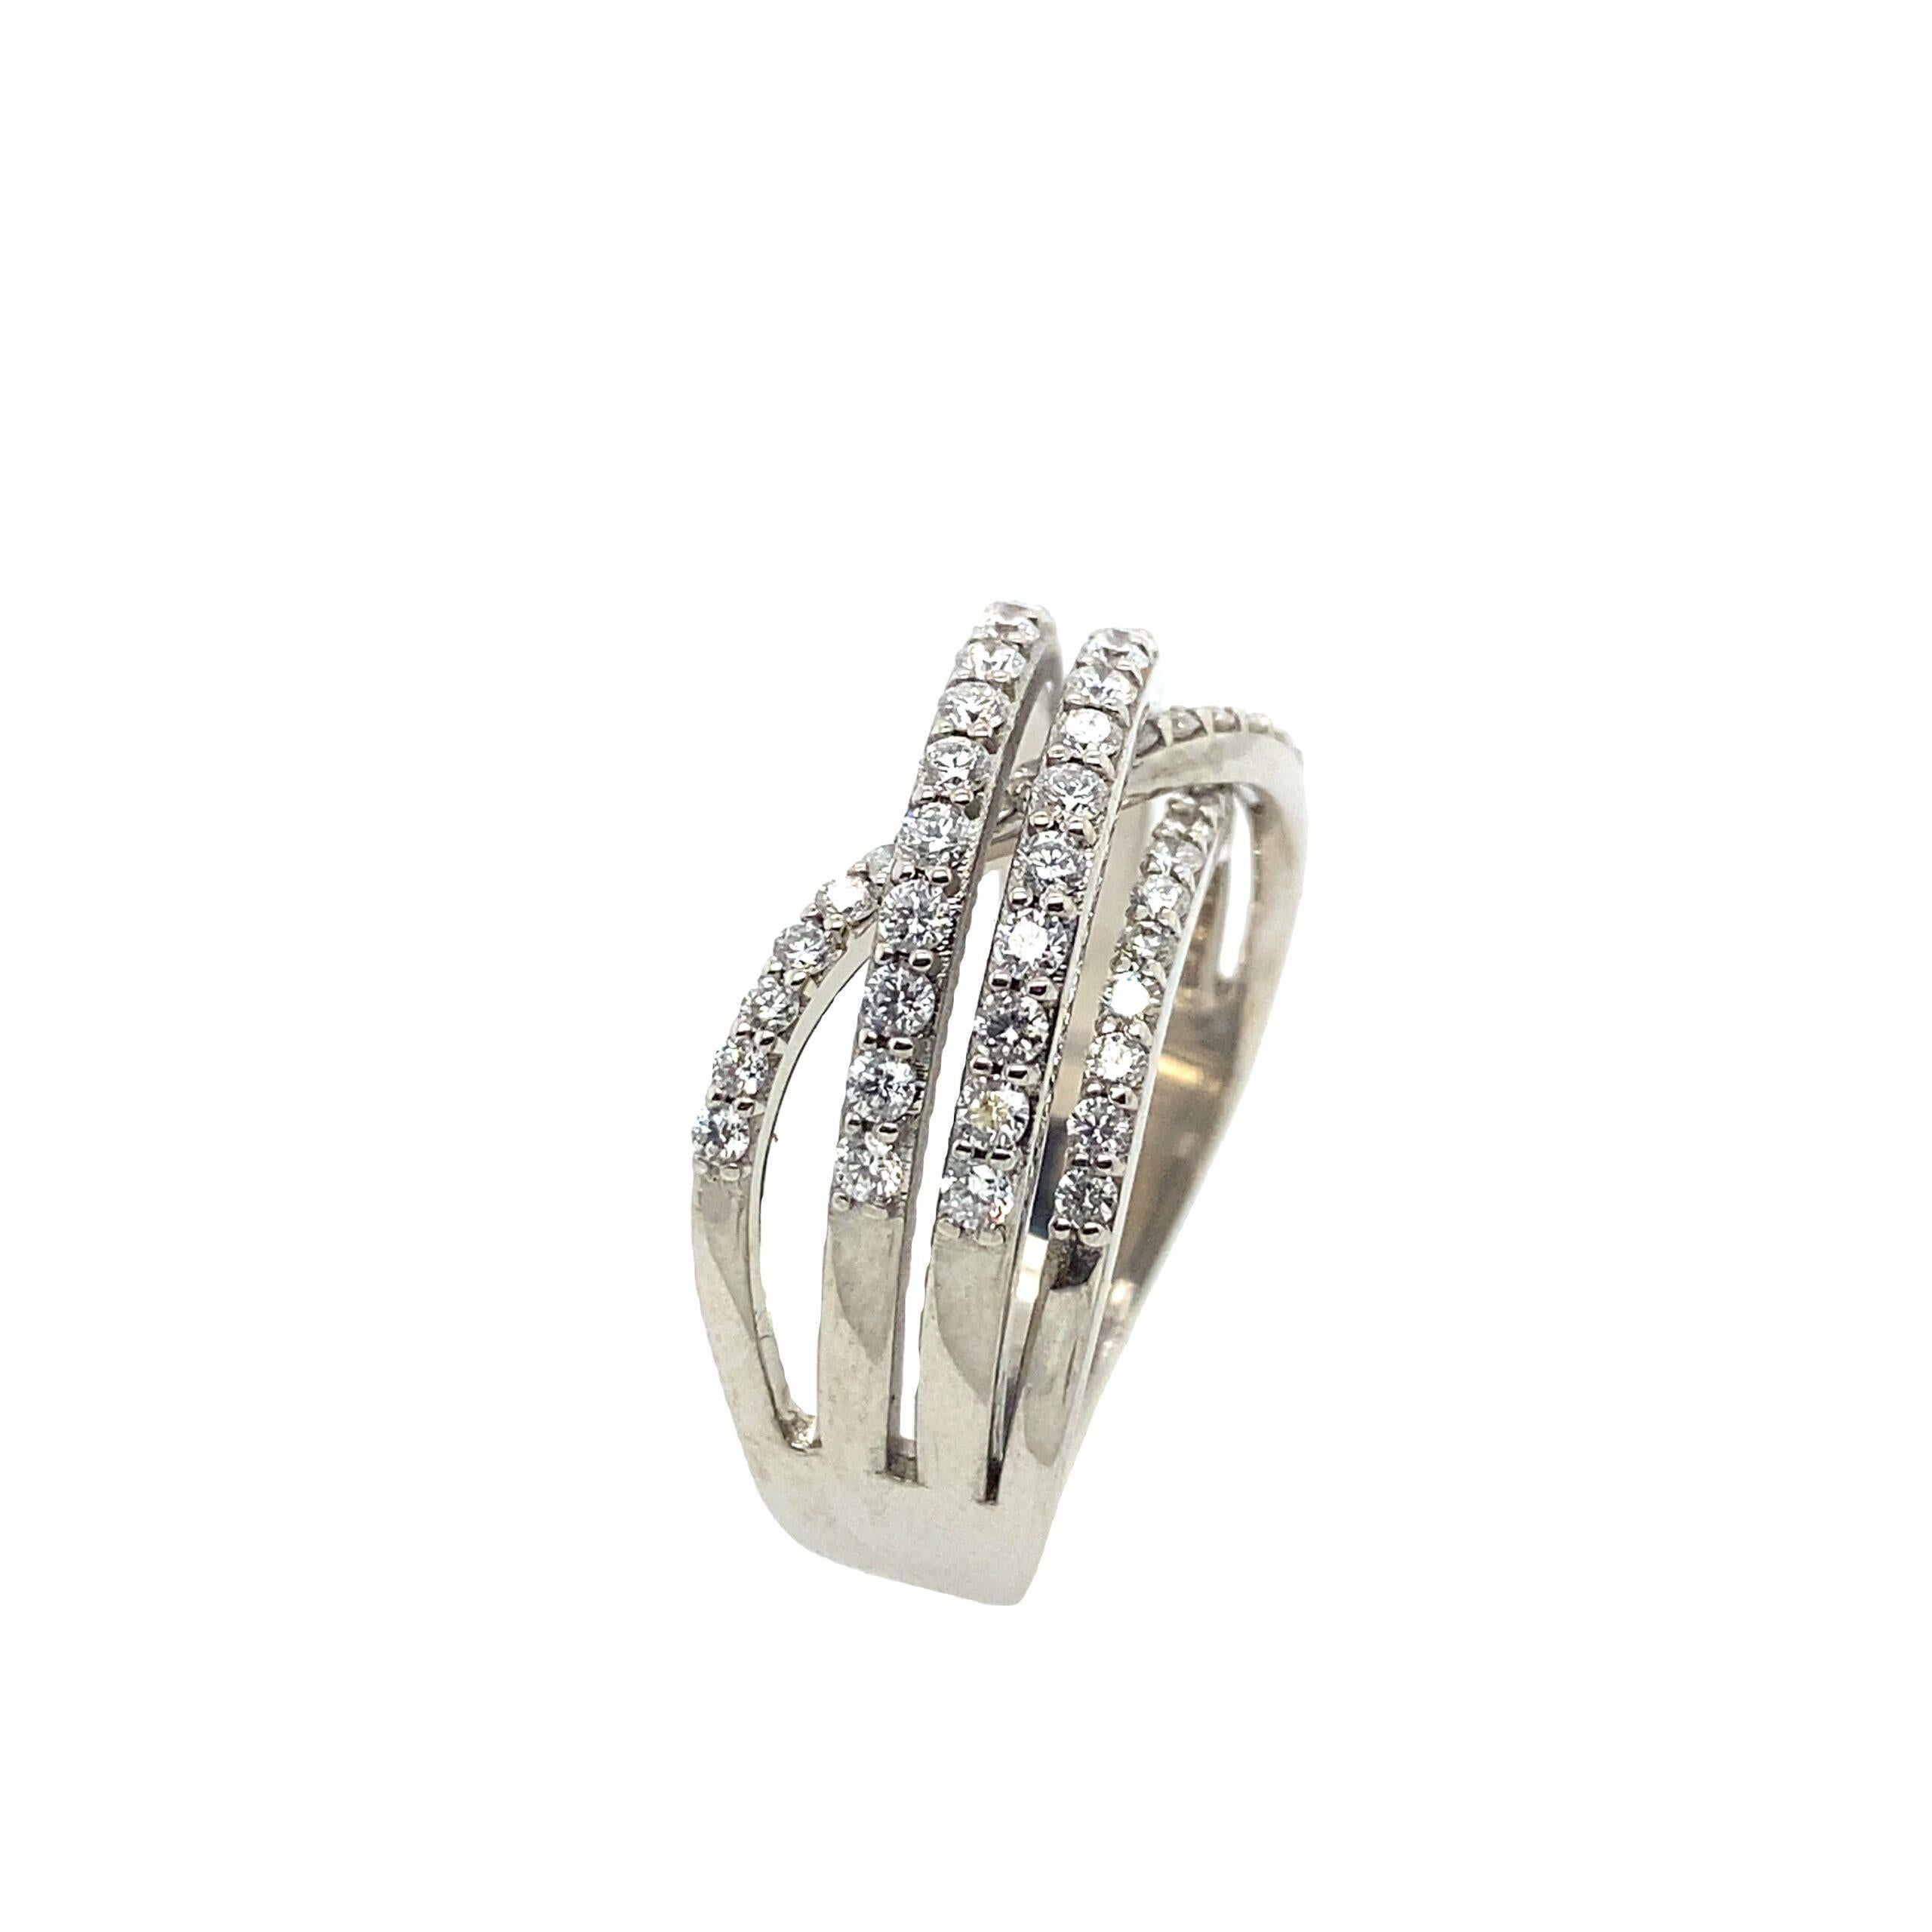 New Fine Quality 4 Row Diamond Dress Ring, Set in 18ct White Gold, TDW 0.80ct

Additional Information:
Set in 18ct White Gold
Total Diamond Weight: 0.80ct 
Diamond Colour: F/G
Diamond Clarity: VS
Total Weight: 8.5g  
Ring Size: P
SMS3277